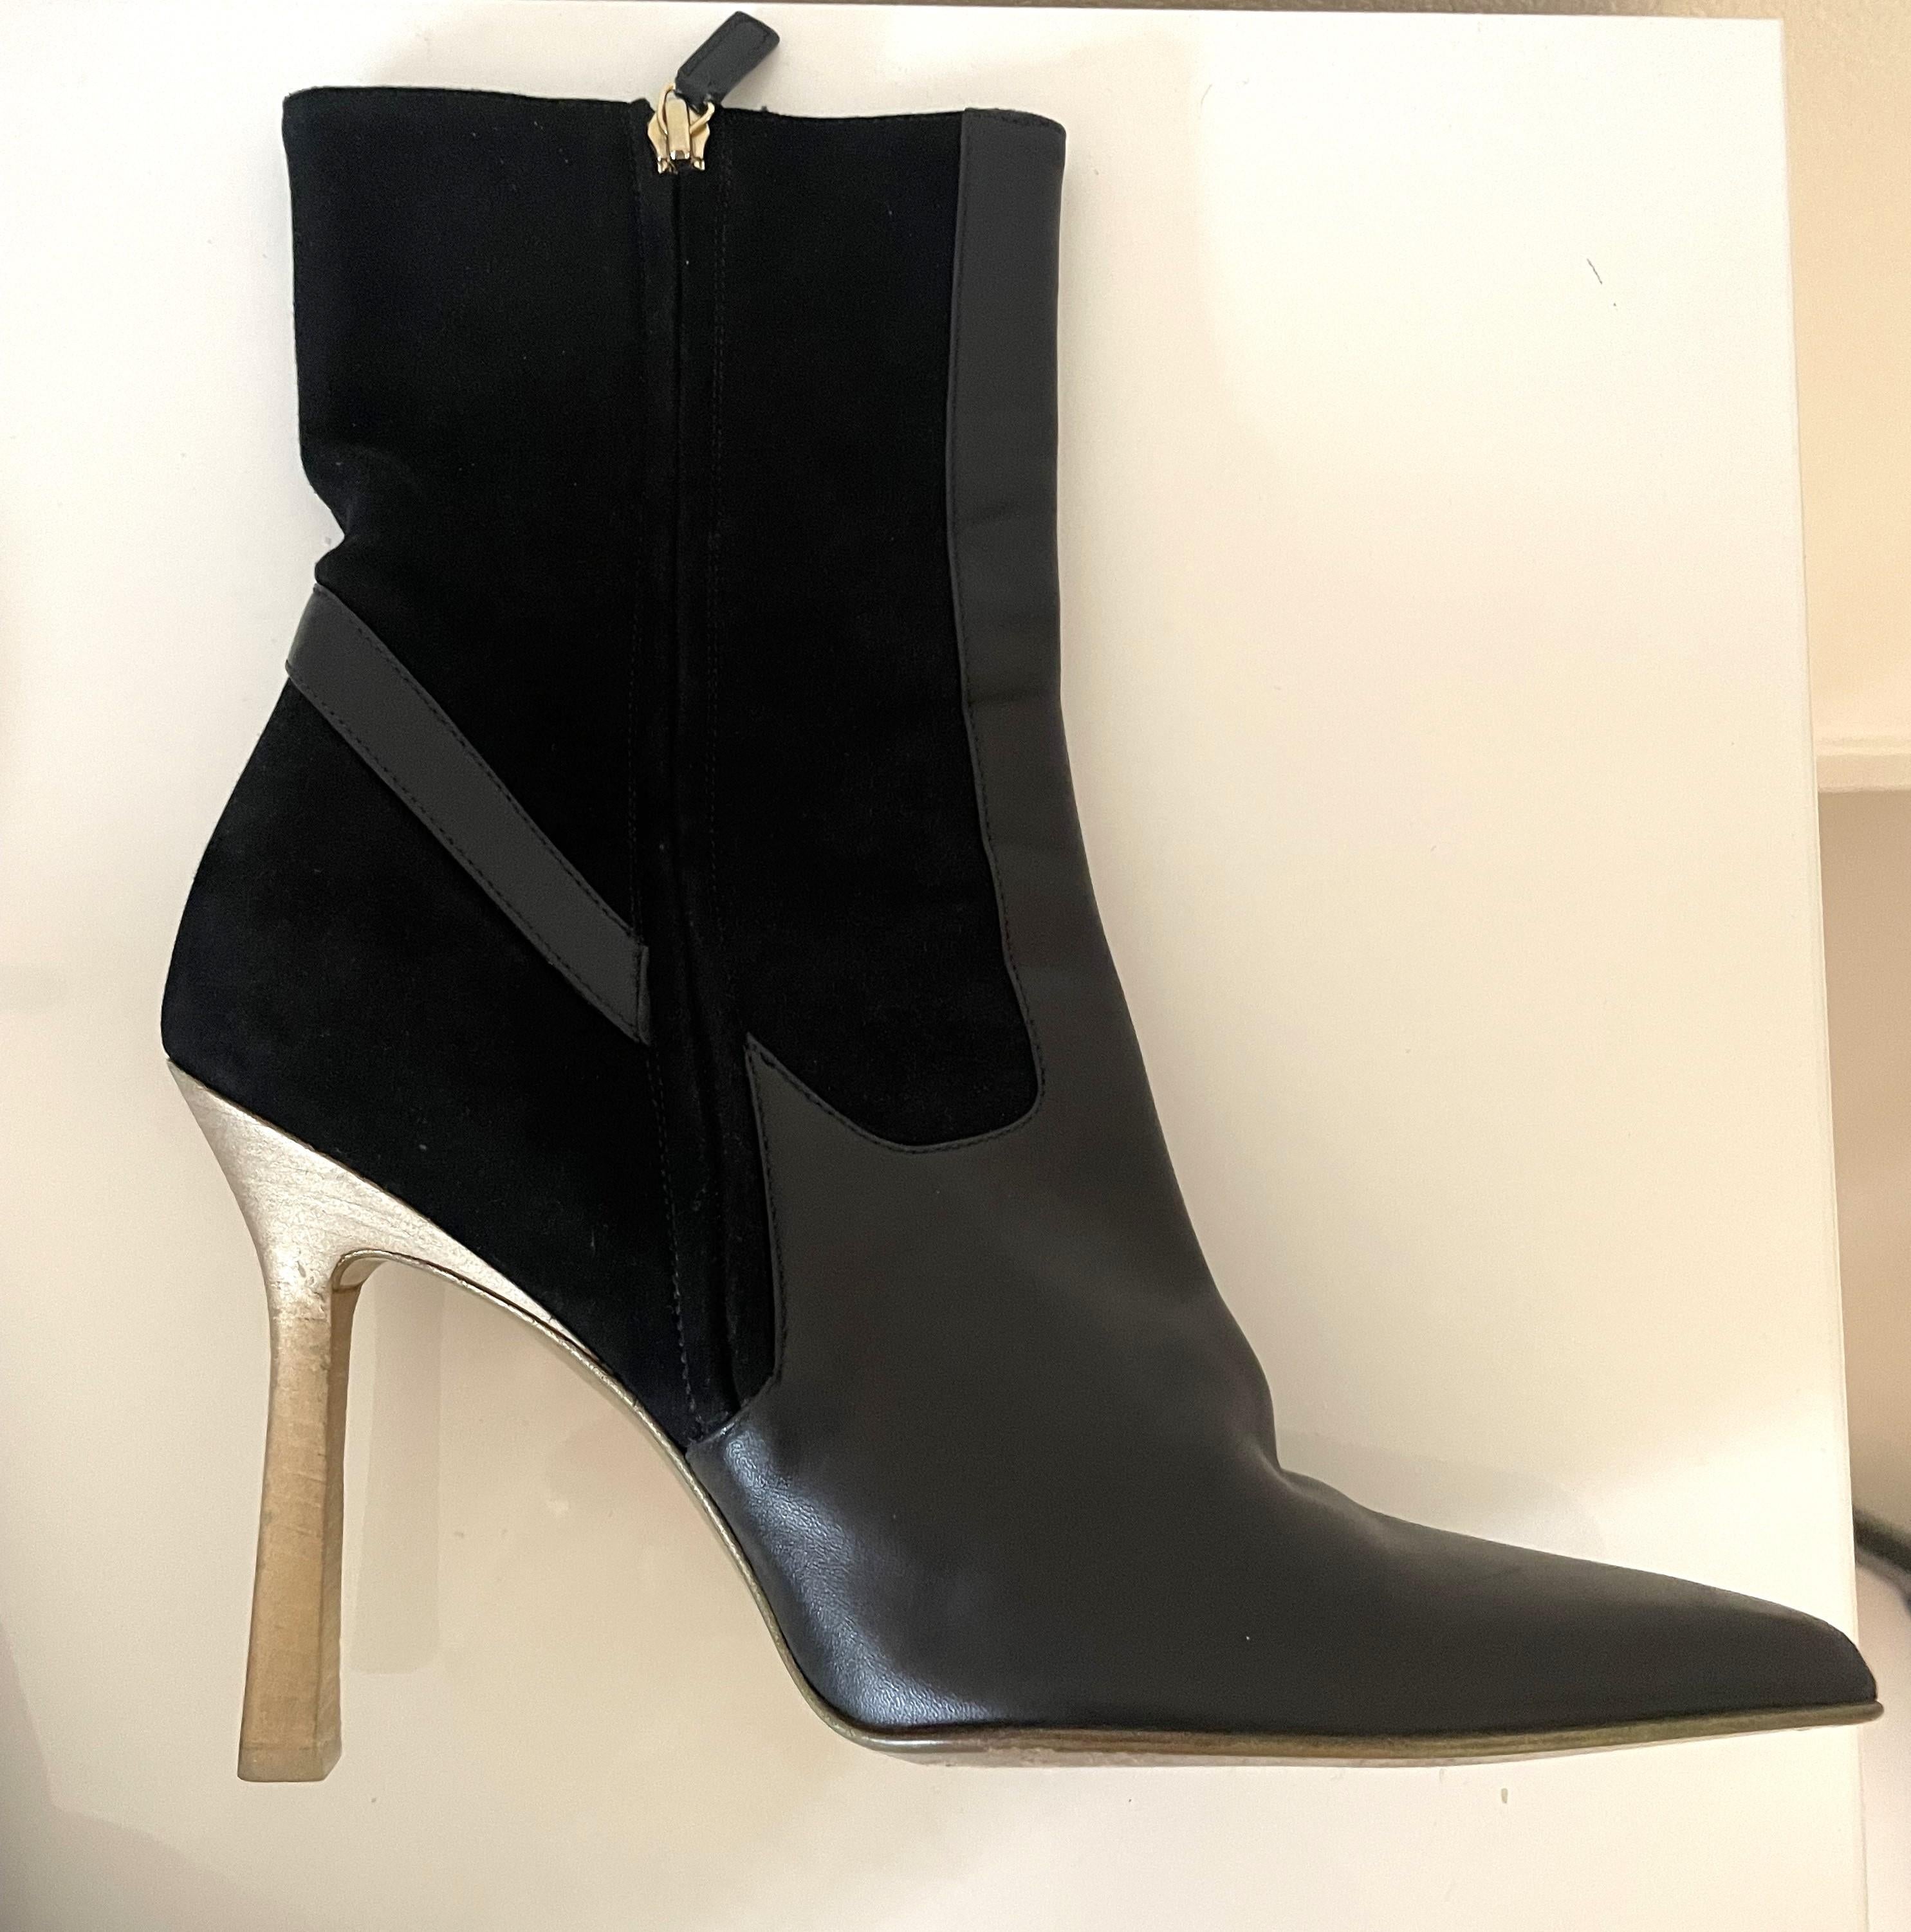 Gucci Rare Black Suede Leather High Heel Ankle Boots Gold Metal Panther en vente 1